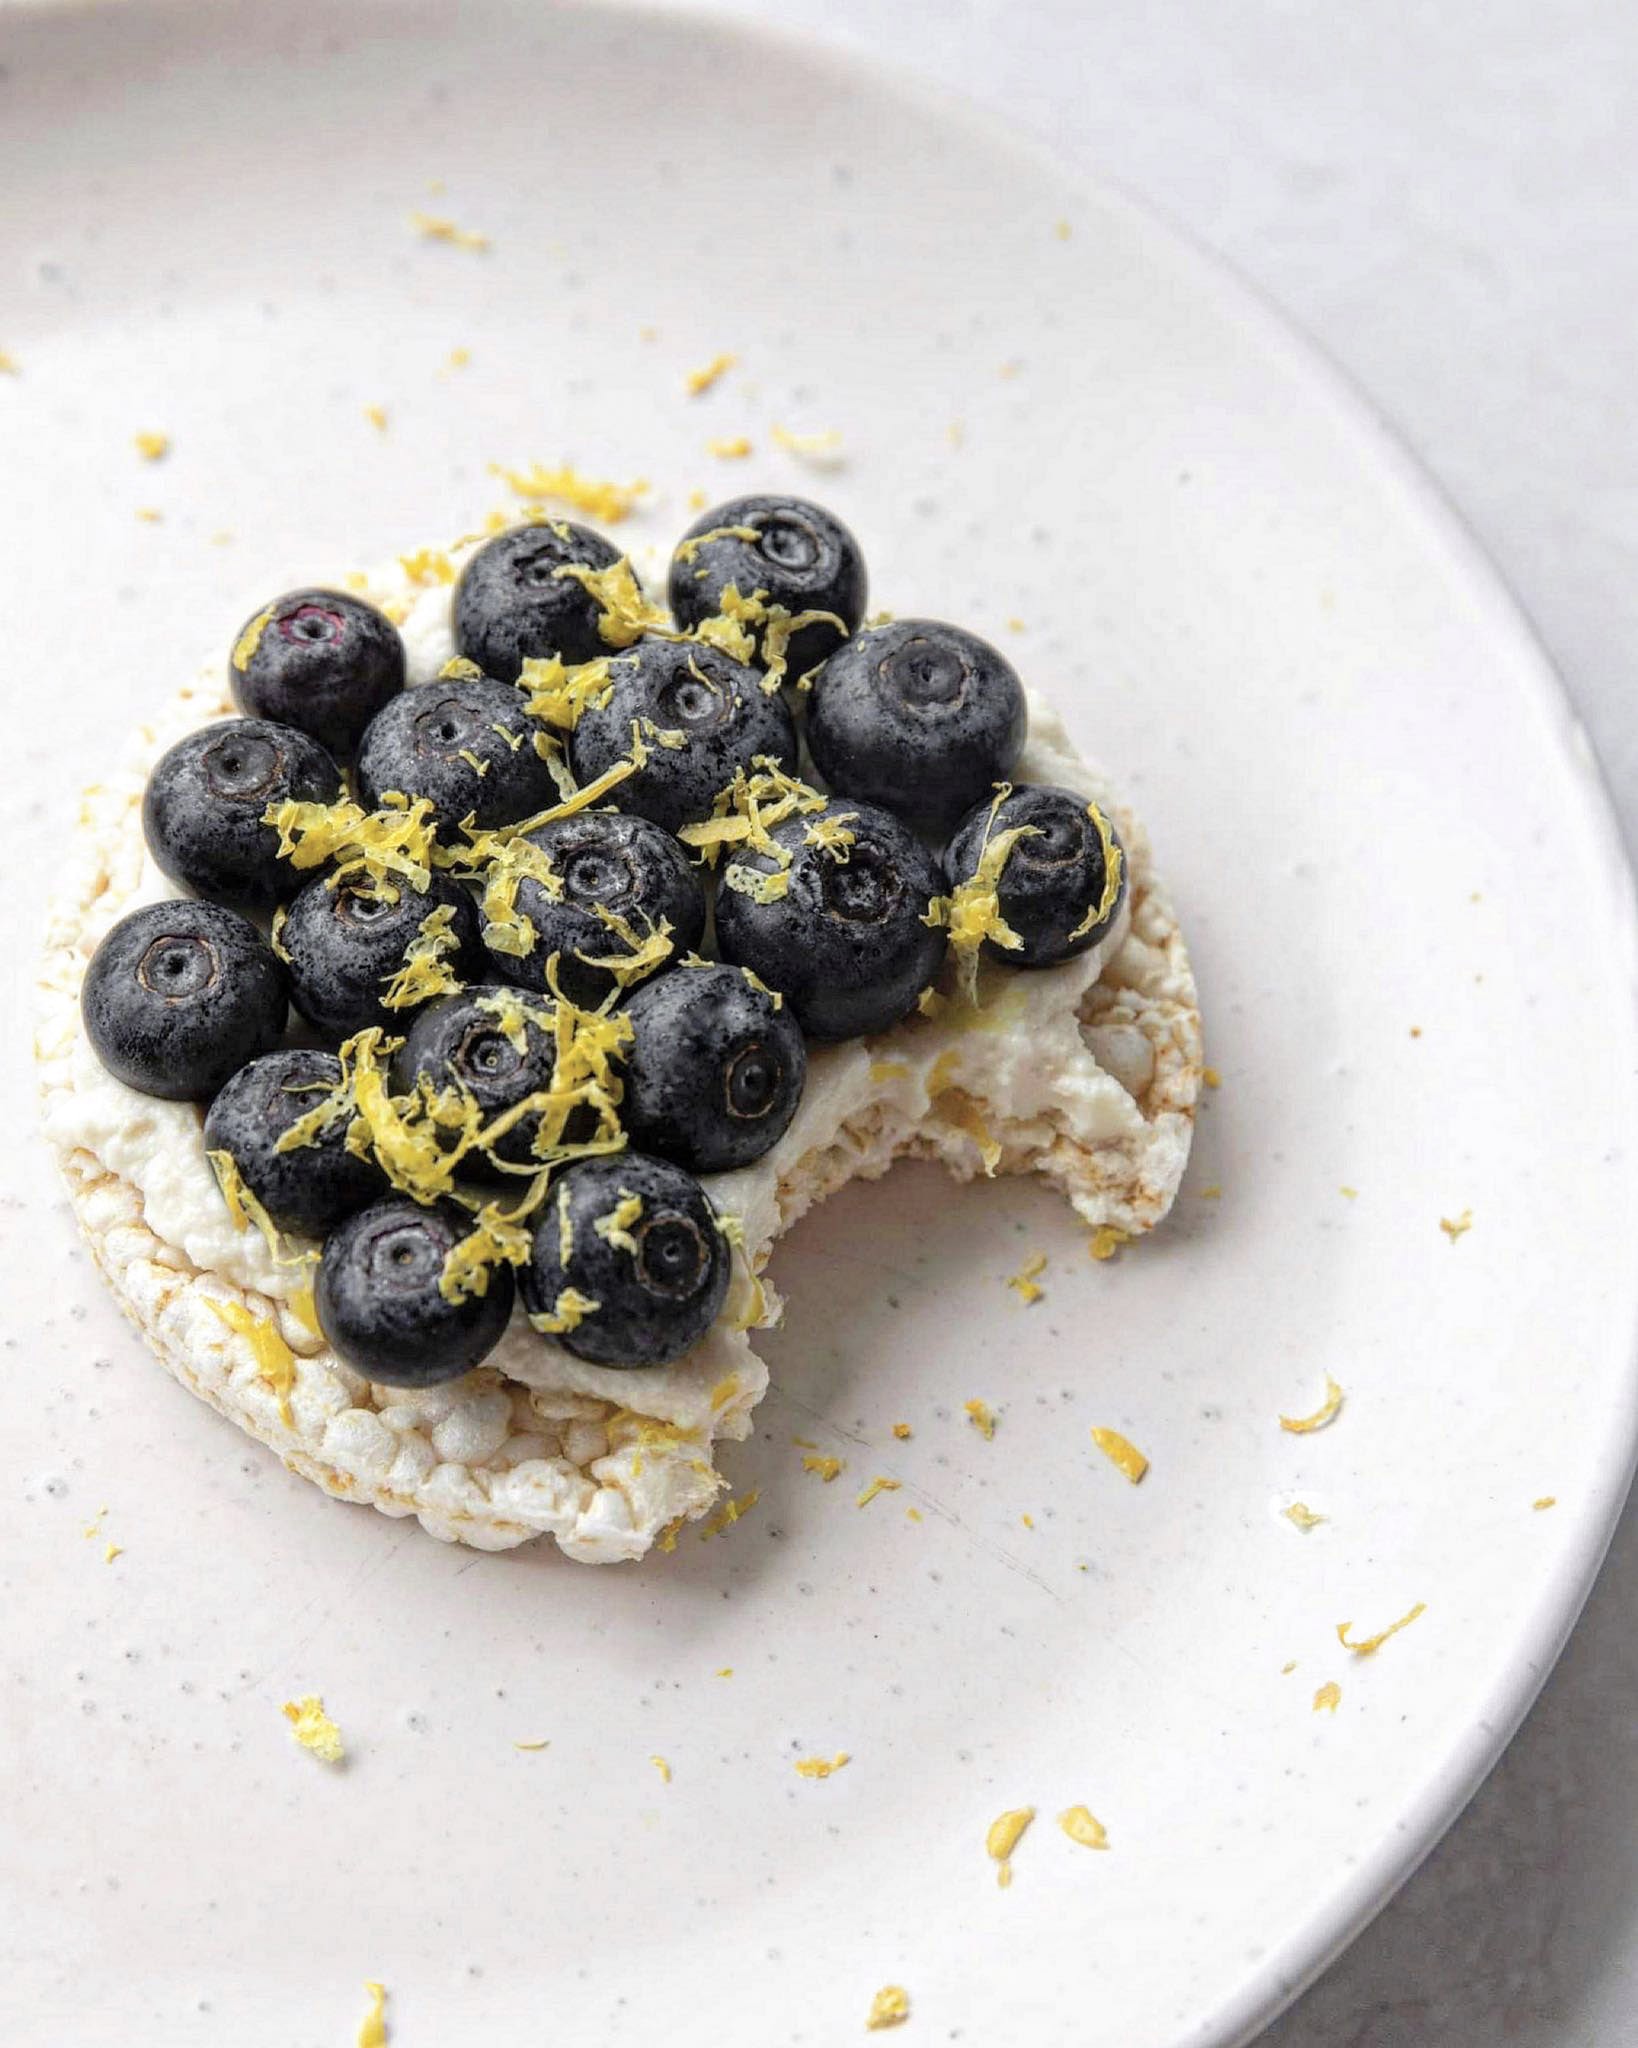 Are Rice Cakes a Healthy Snack?